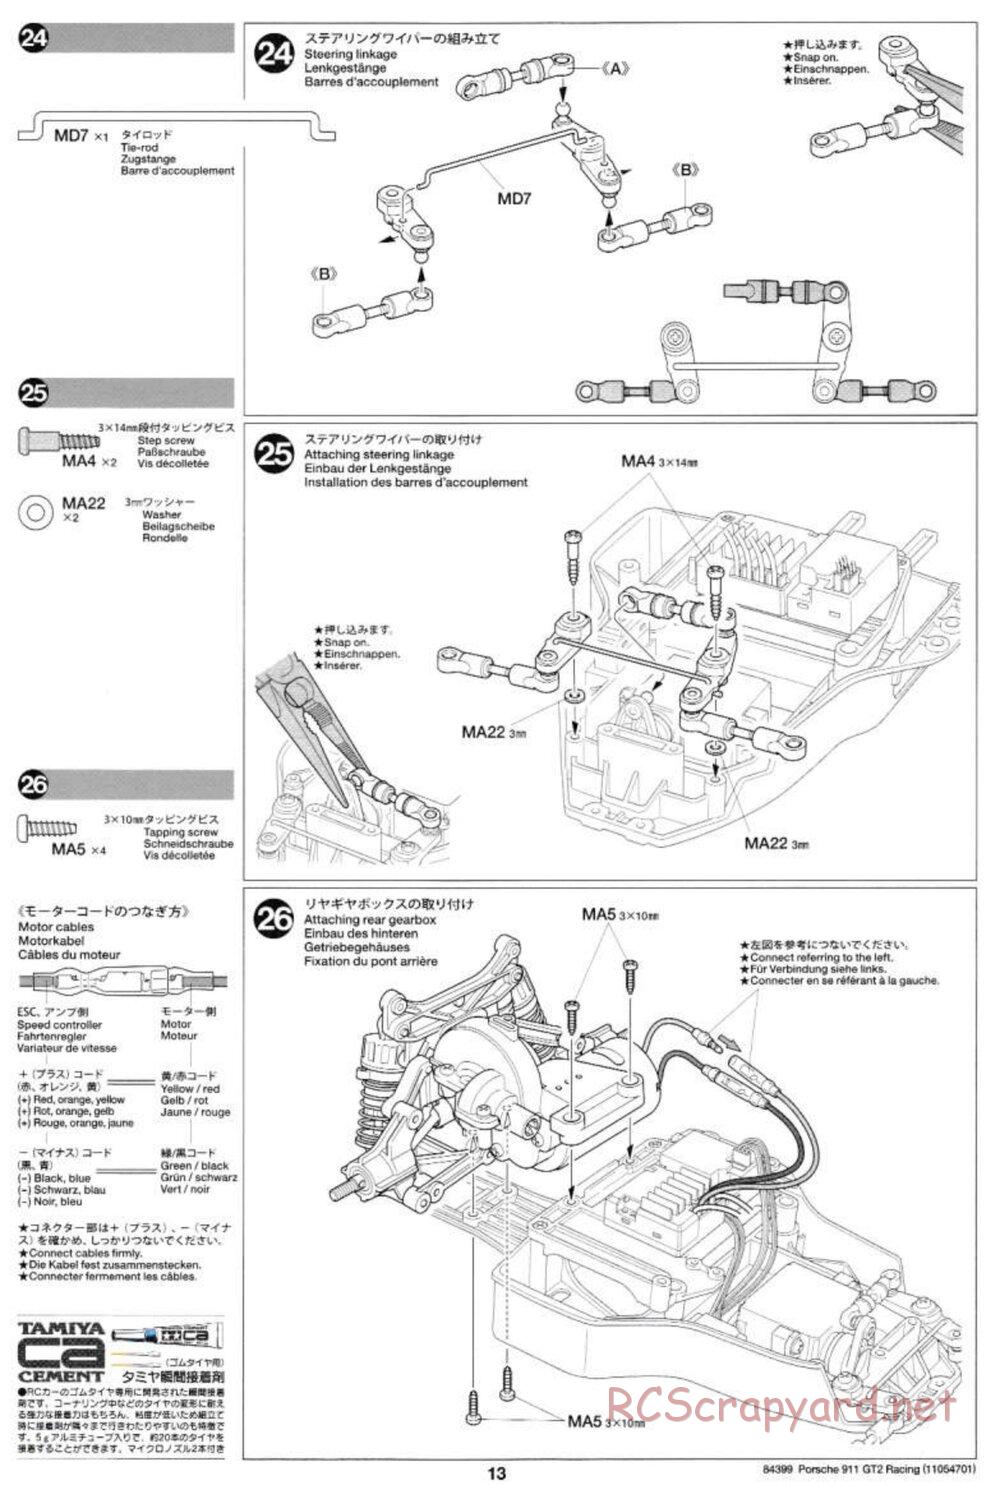 Tamiya - Porsche 911 GT2 Racing - TA-02SW Chassis - Manual - Page 13